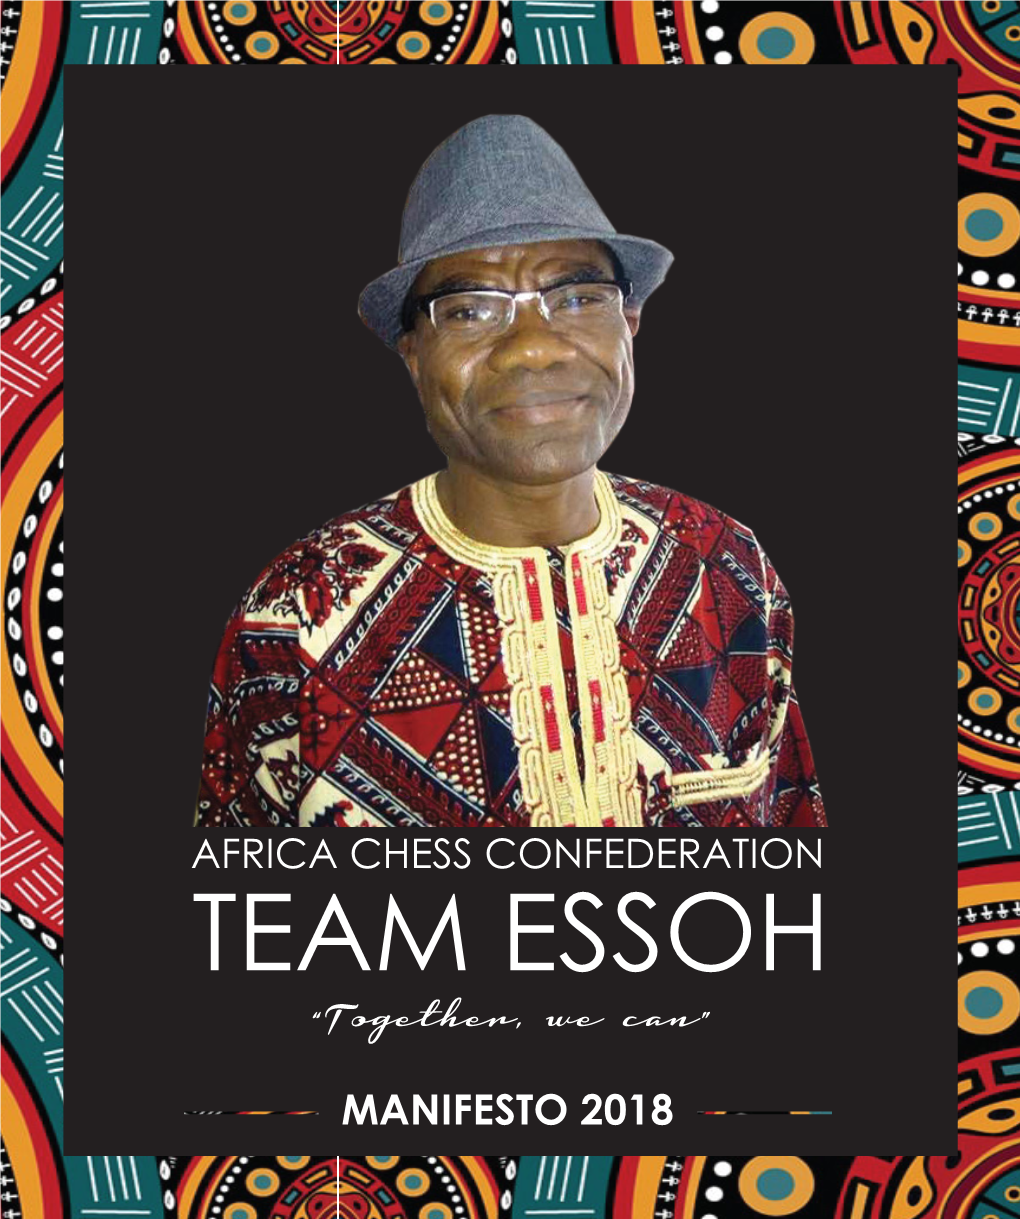 TEAM ESSOH “Together, We Can”